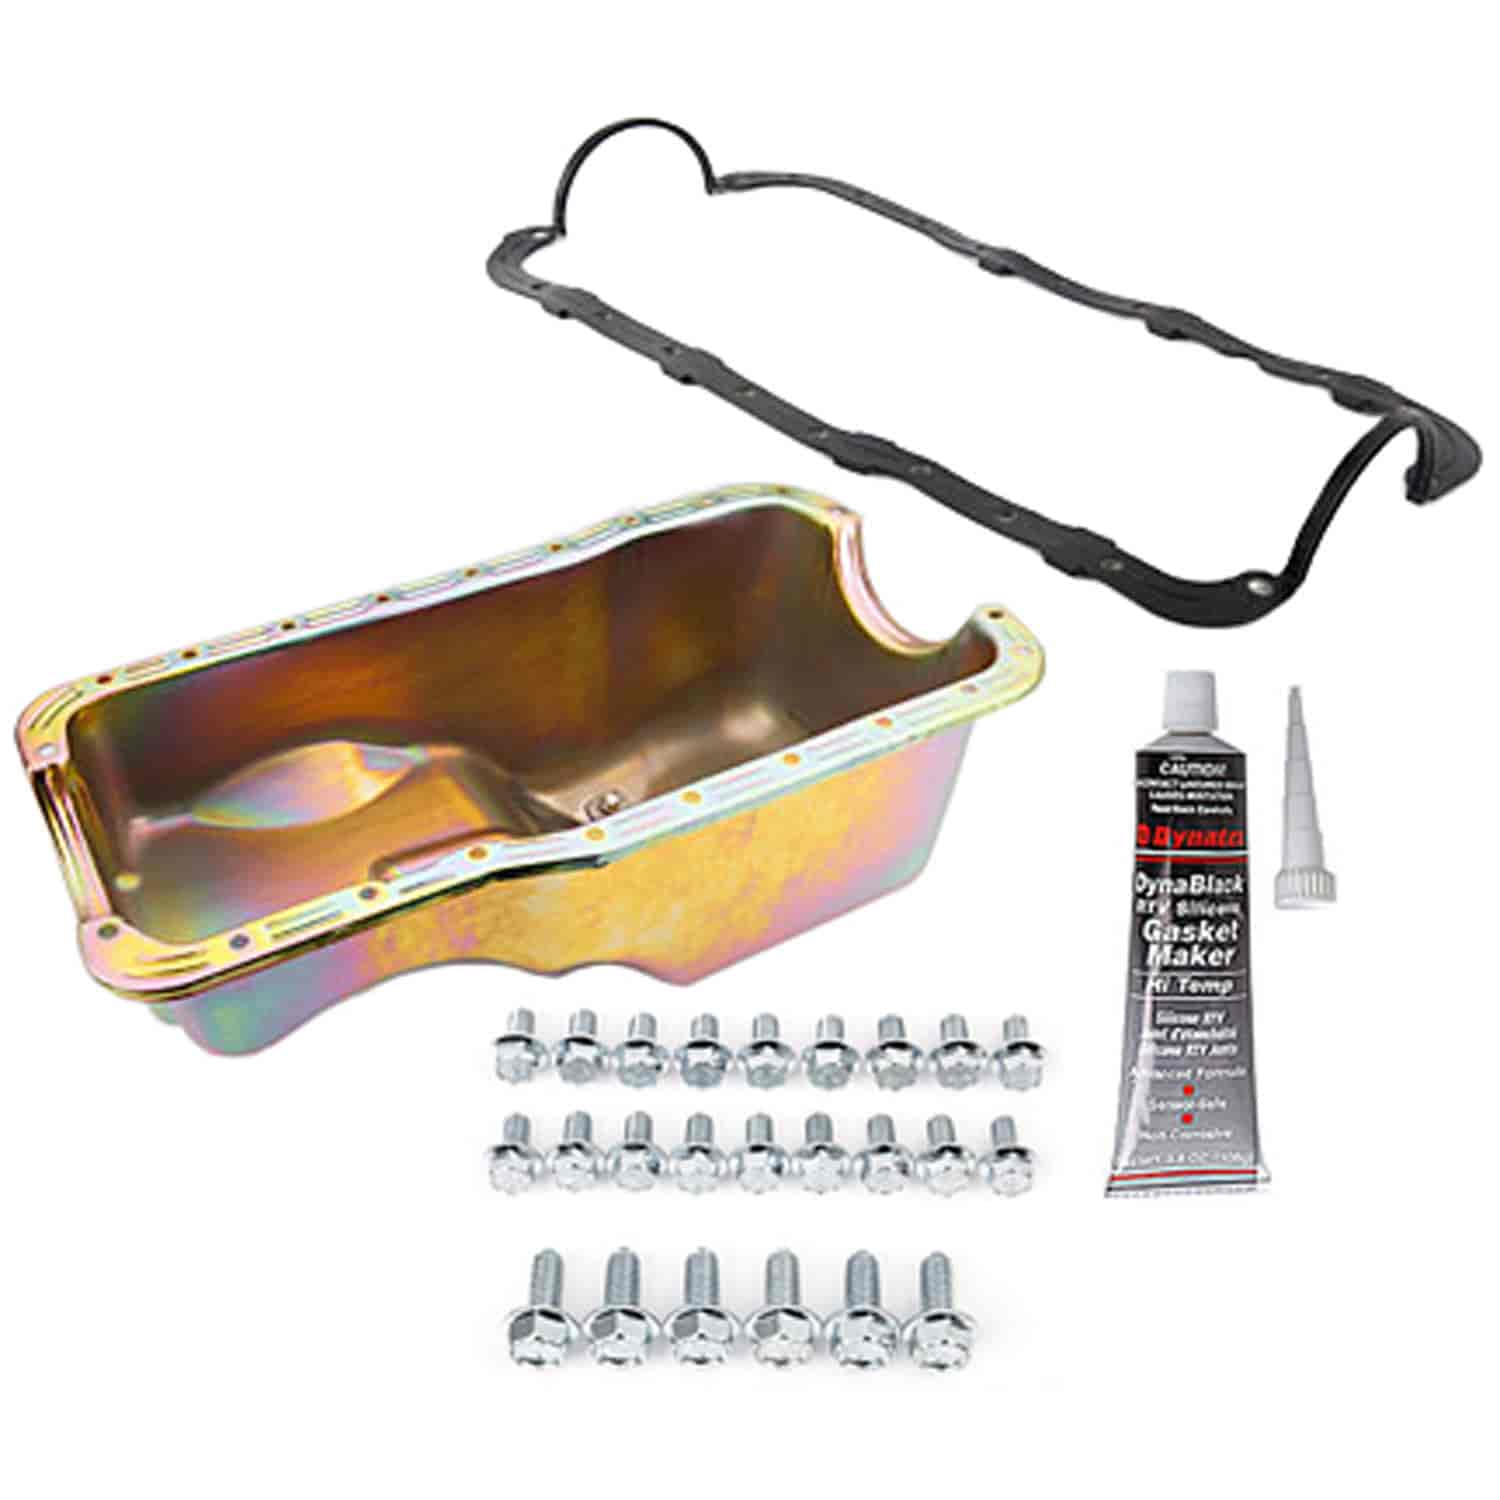 Stock Replacement Oil Pan Kit 1965-87 Small Block Ford 289-302